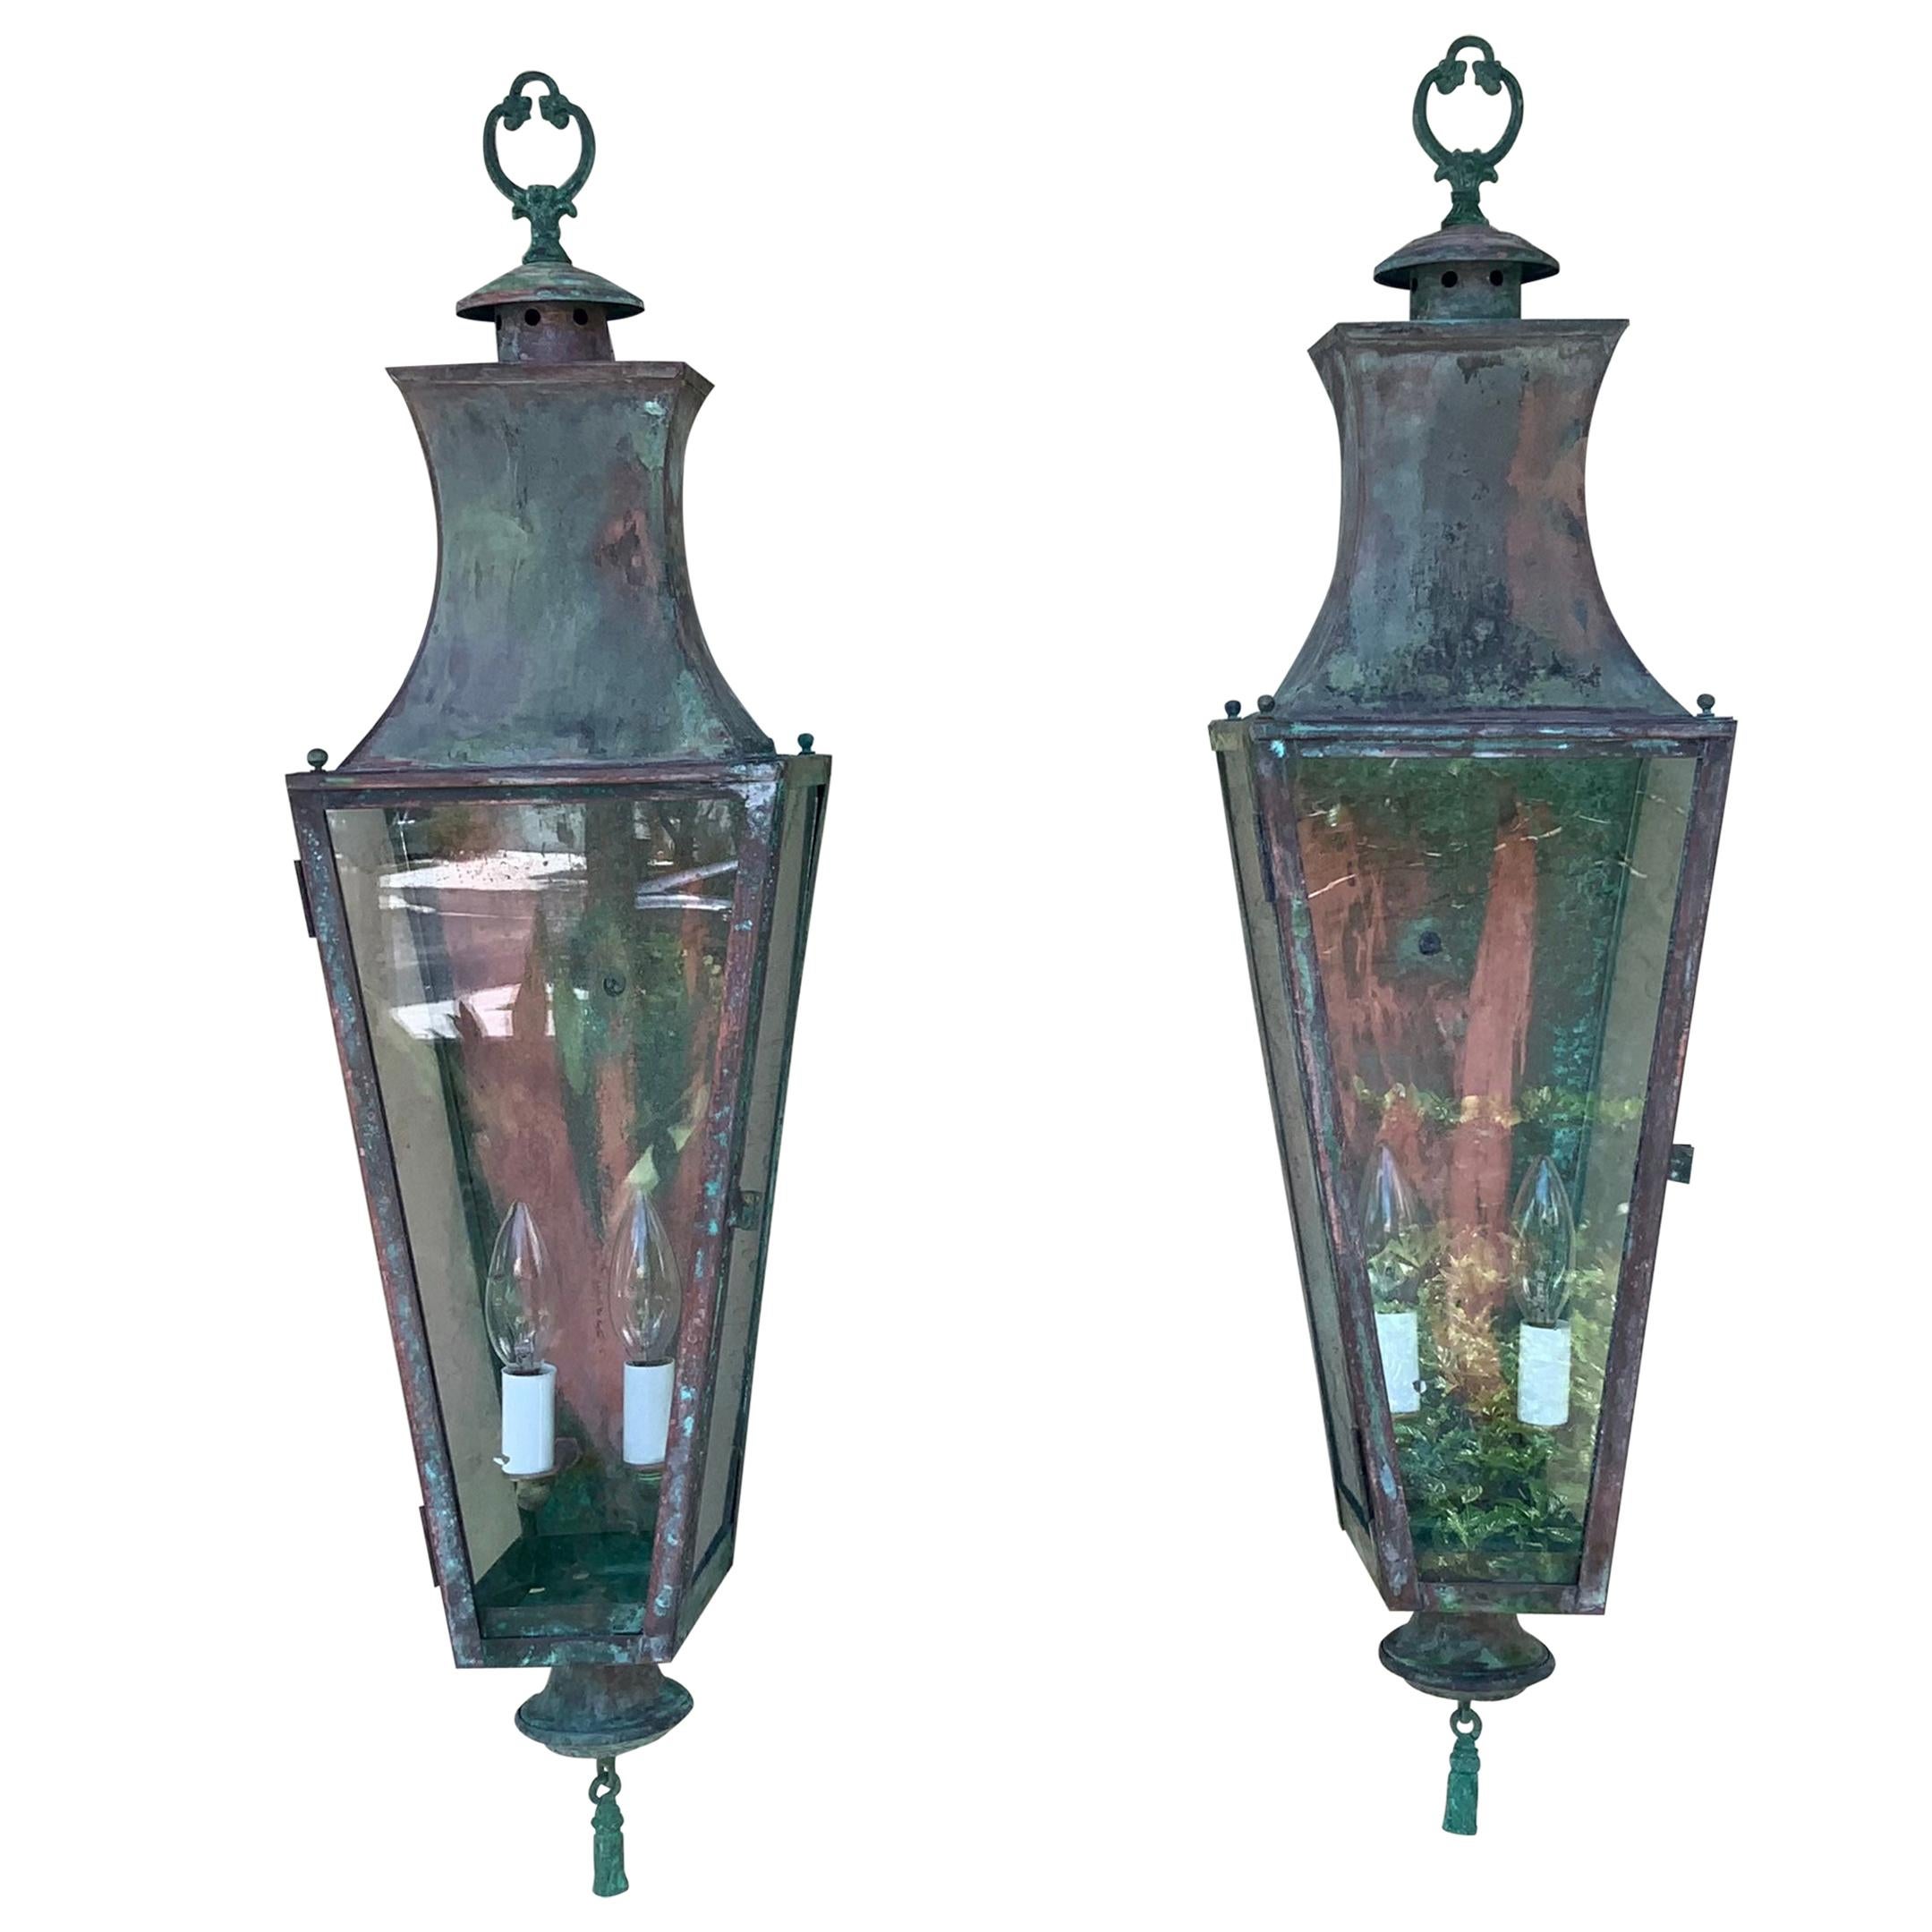 Pair of Large Architectural Wall Lantern